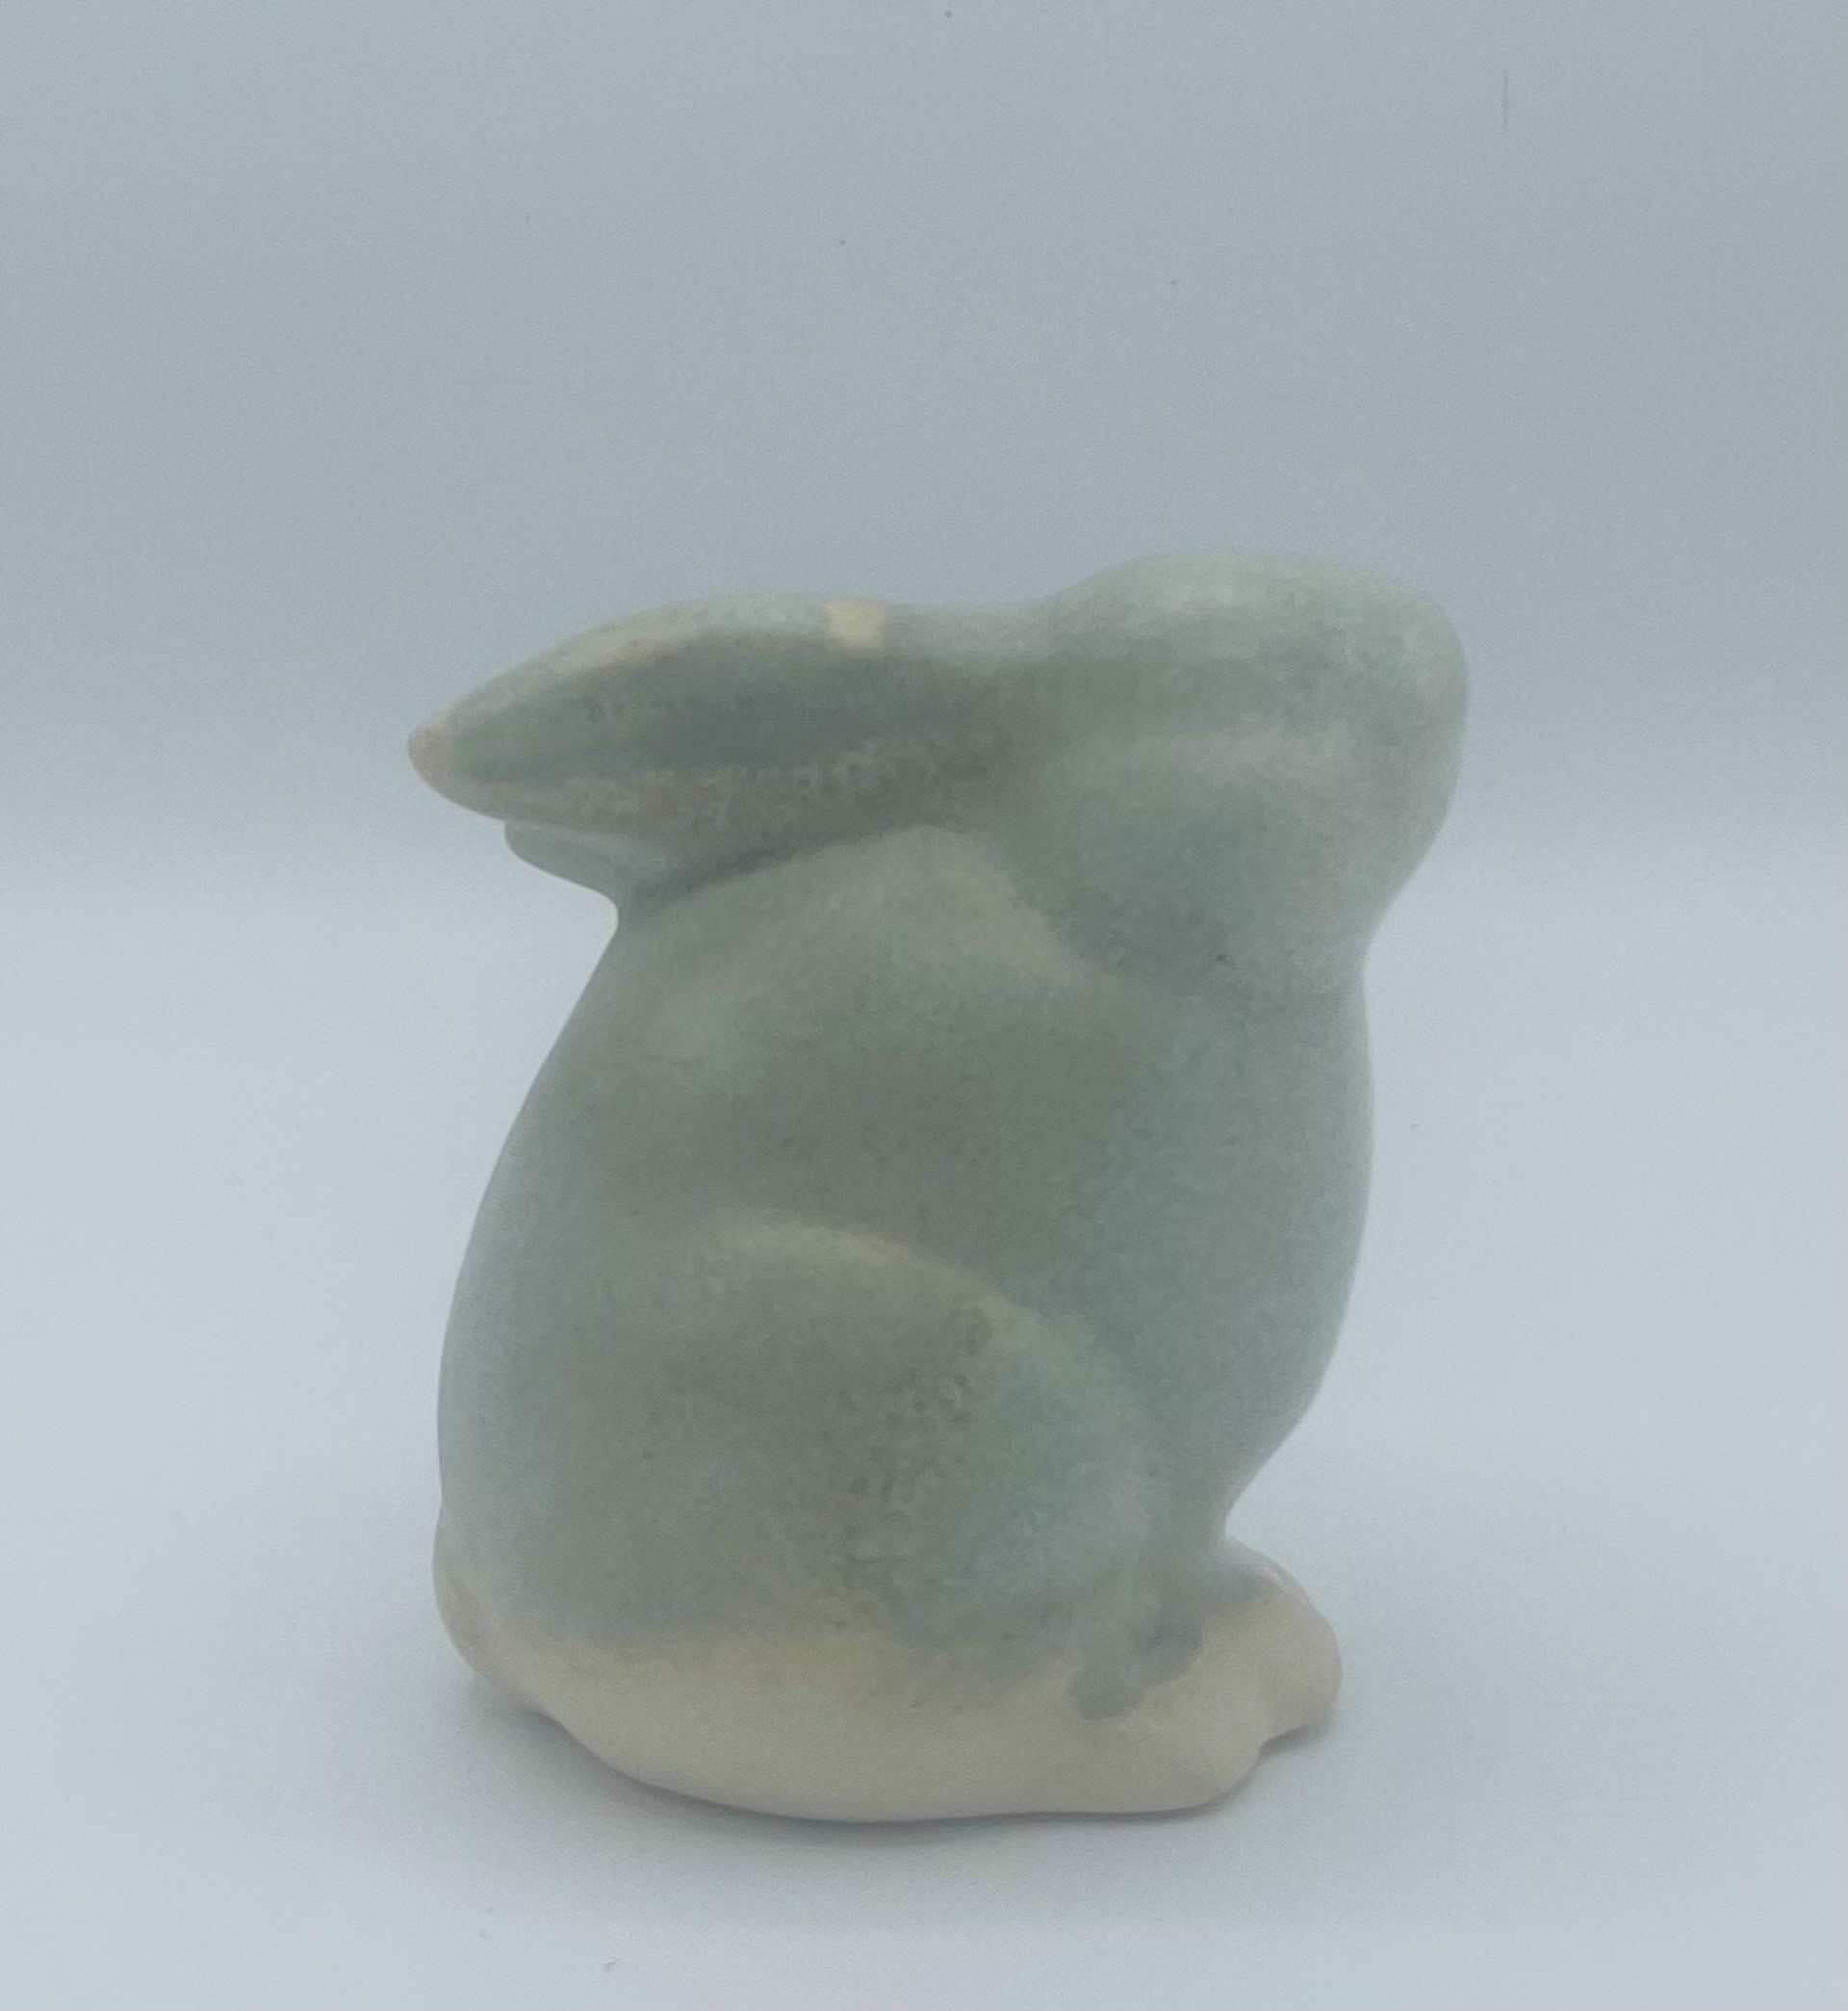 Small Patina Bunny #3 by Satterfield Pottery